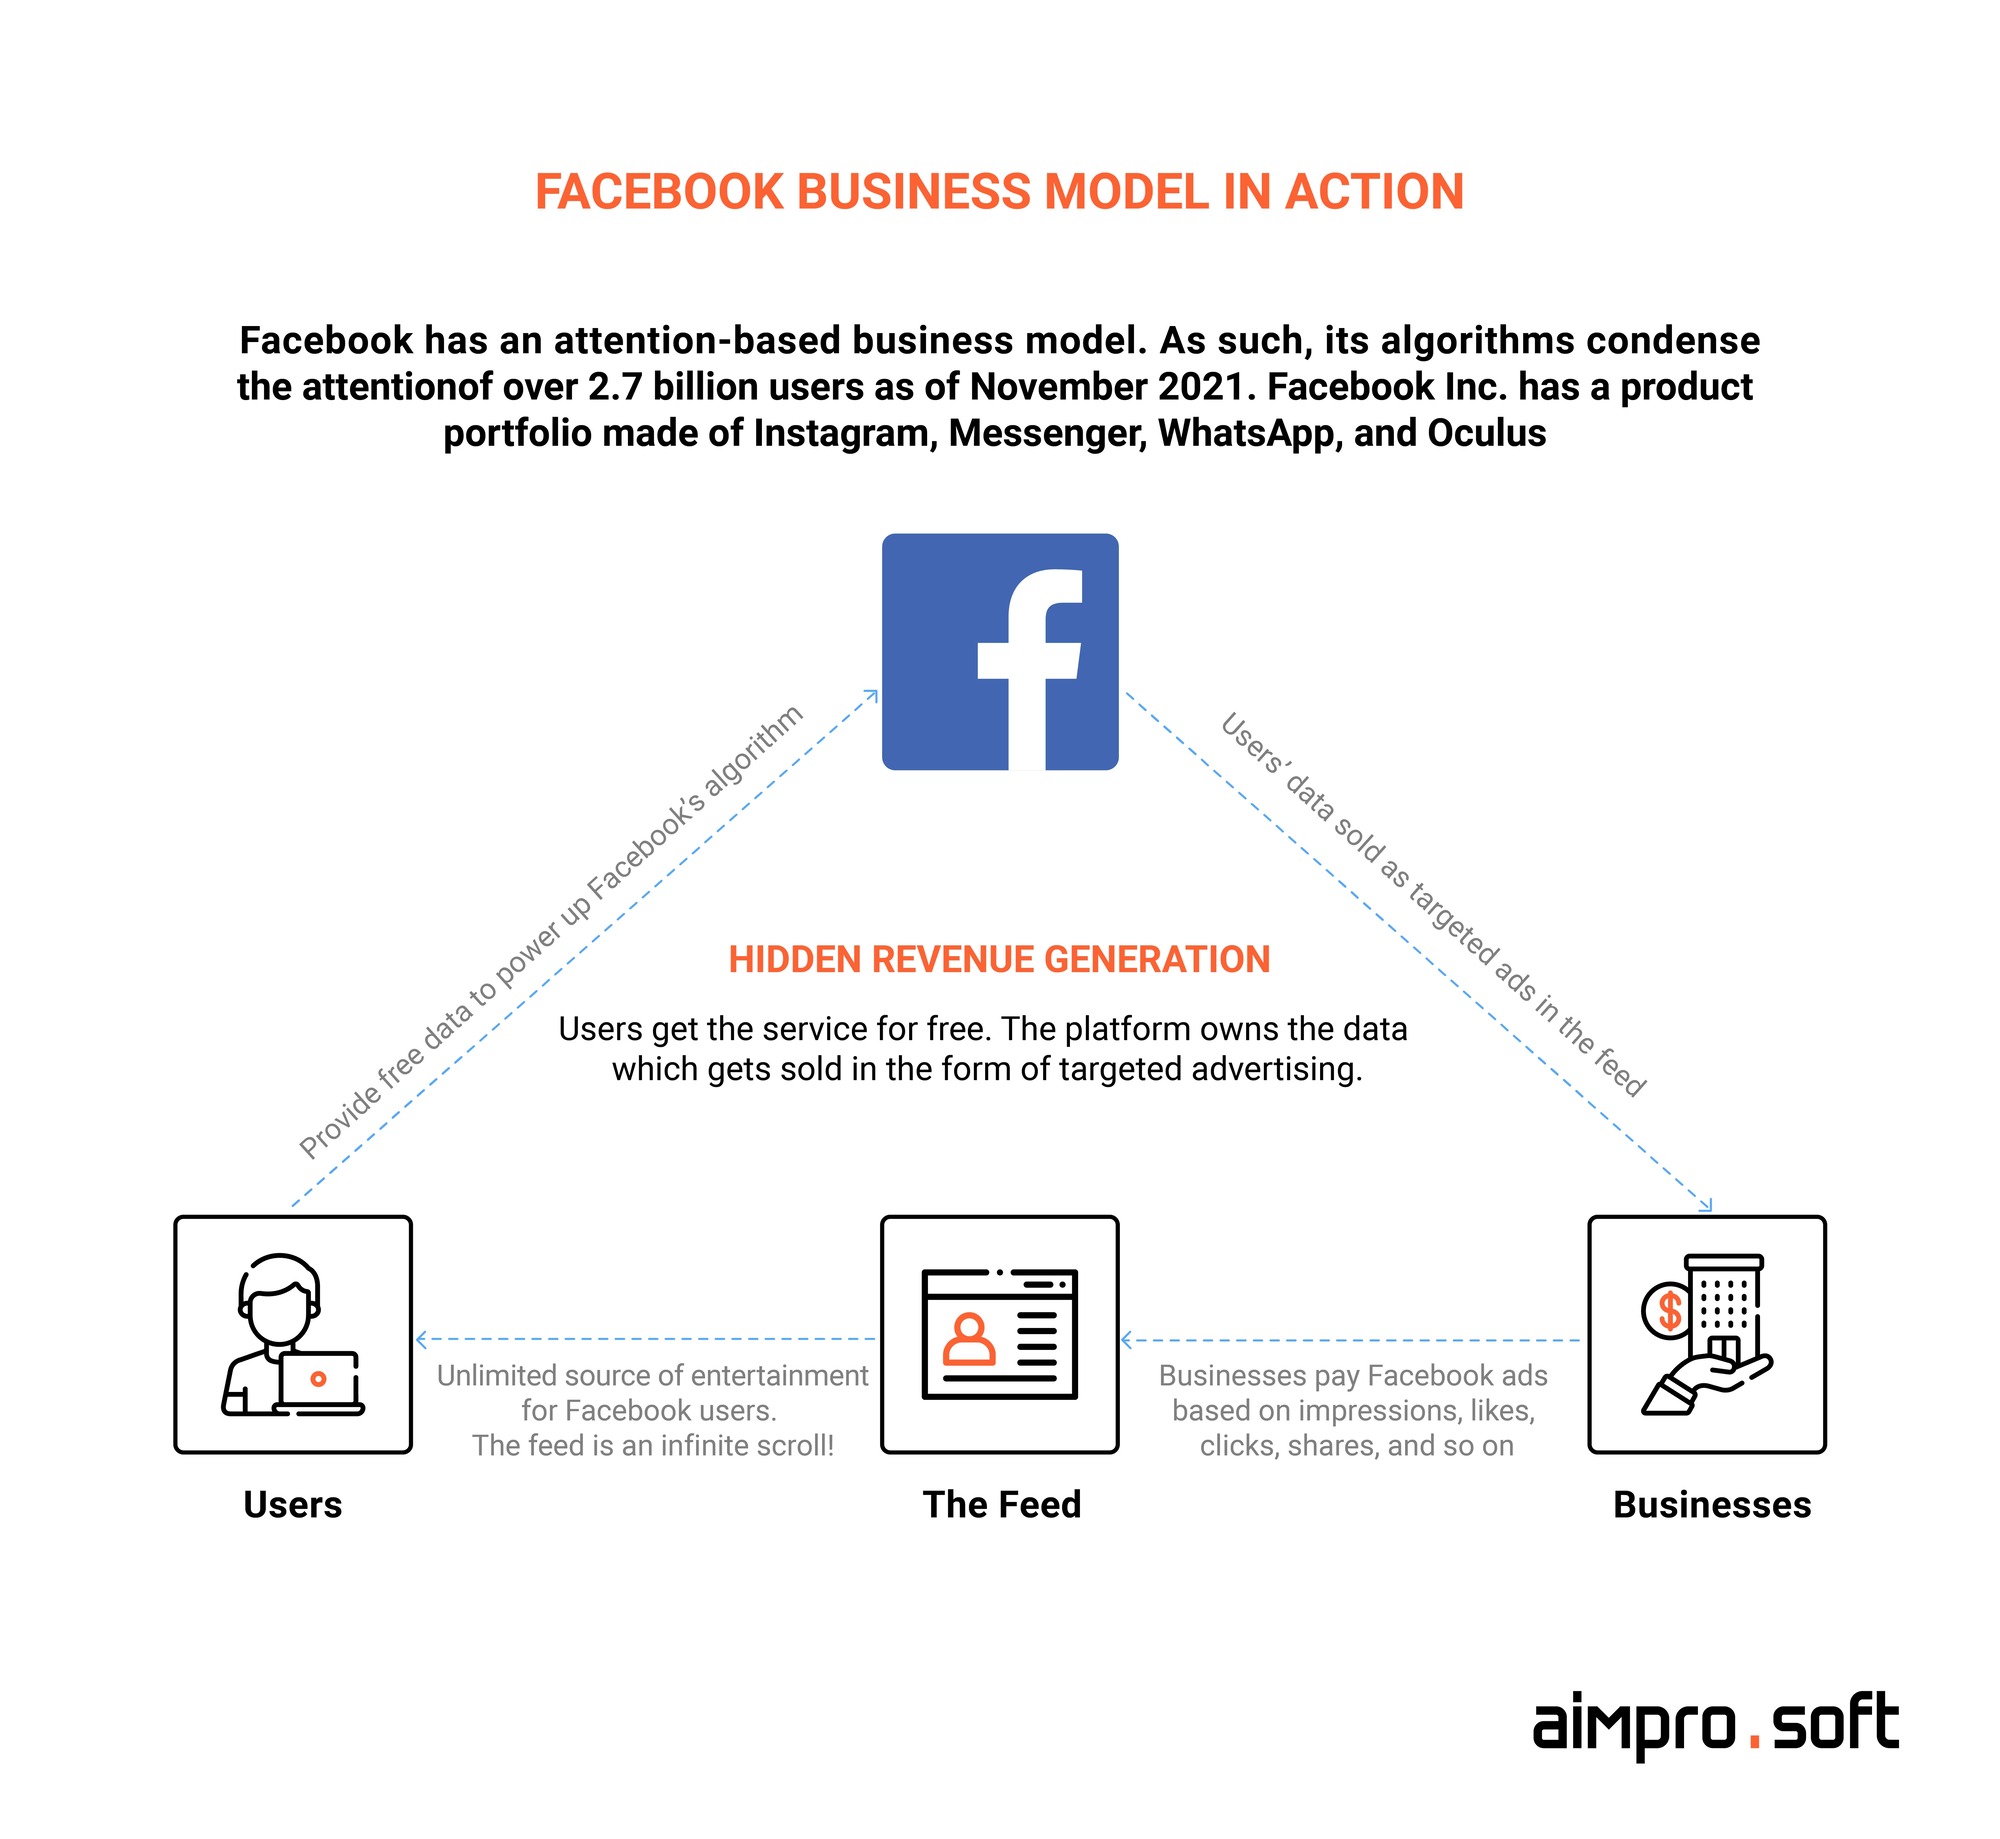 If you want to know how to build your own Facebook-like social network from scratch, Facebook business model is a must-have point to consider